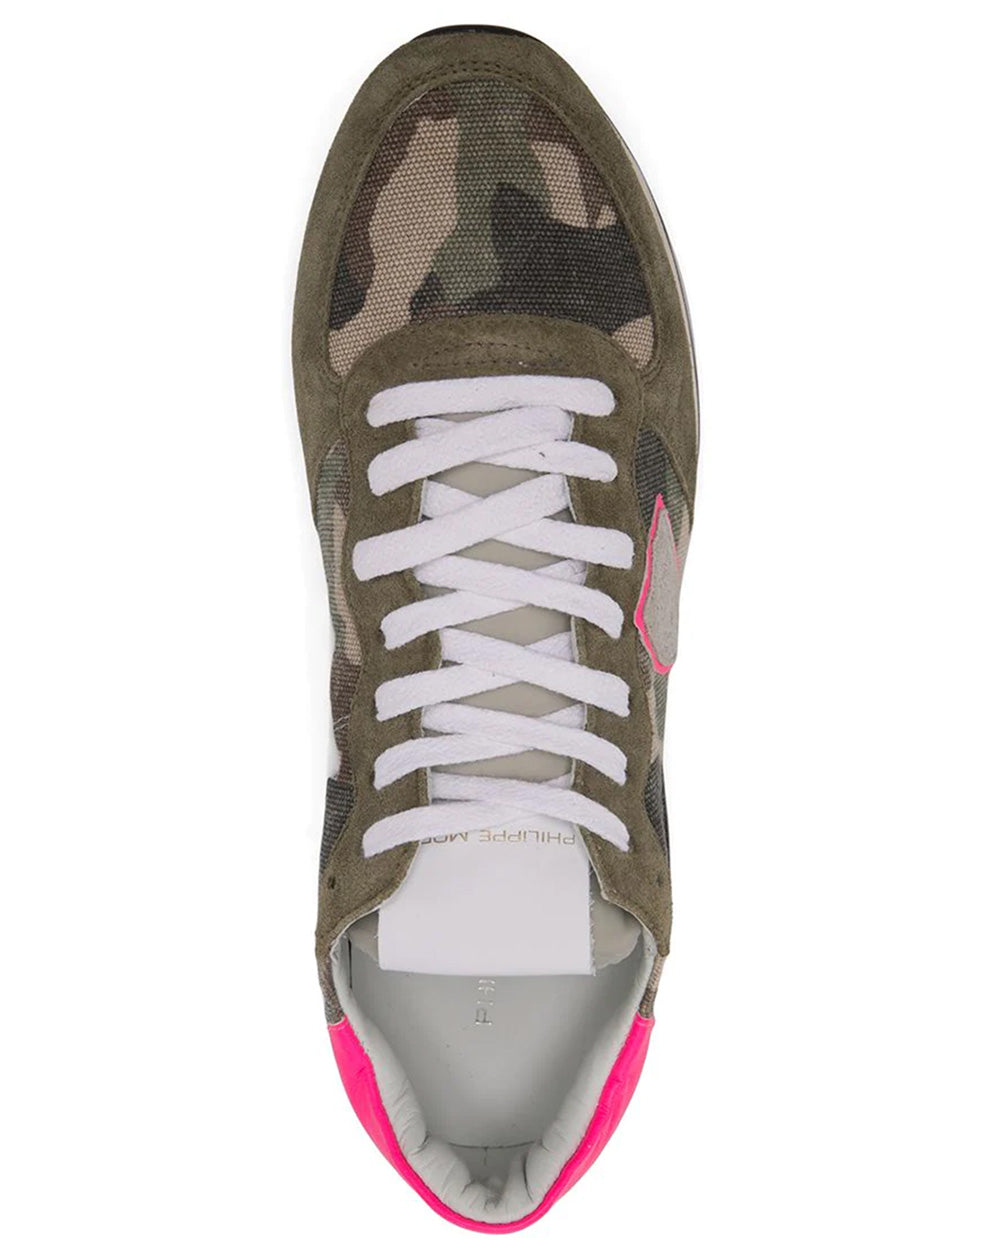 Trpx Camouflage Neon Low Top Sneakers